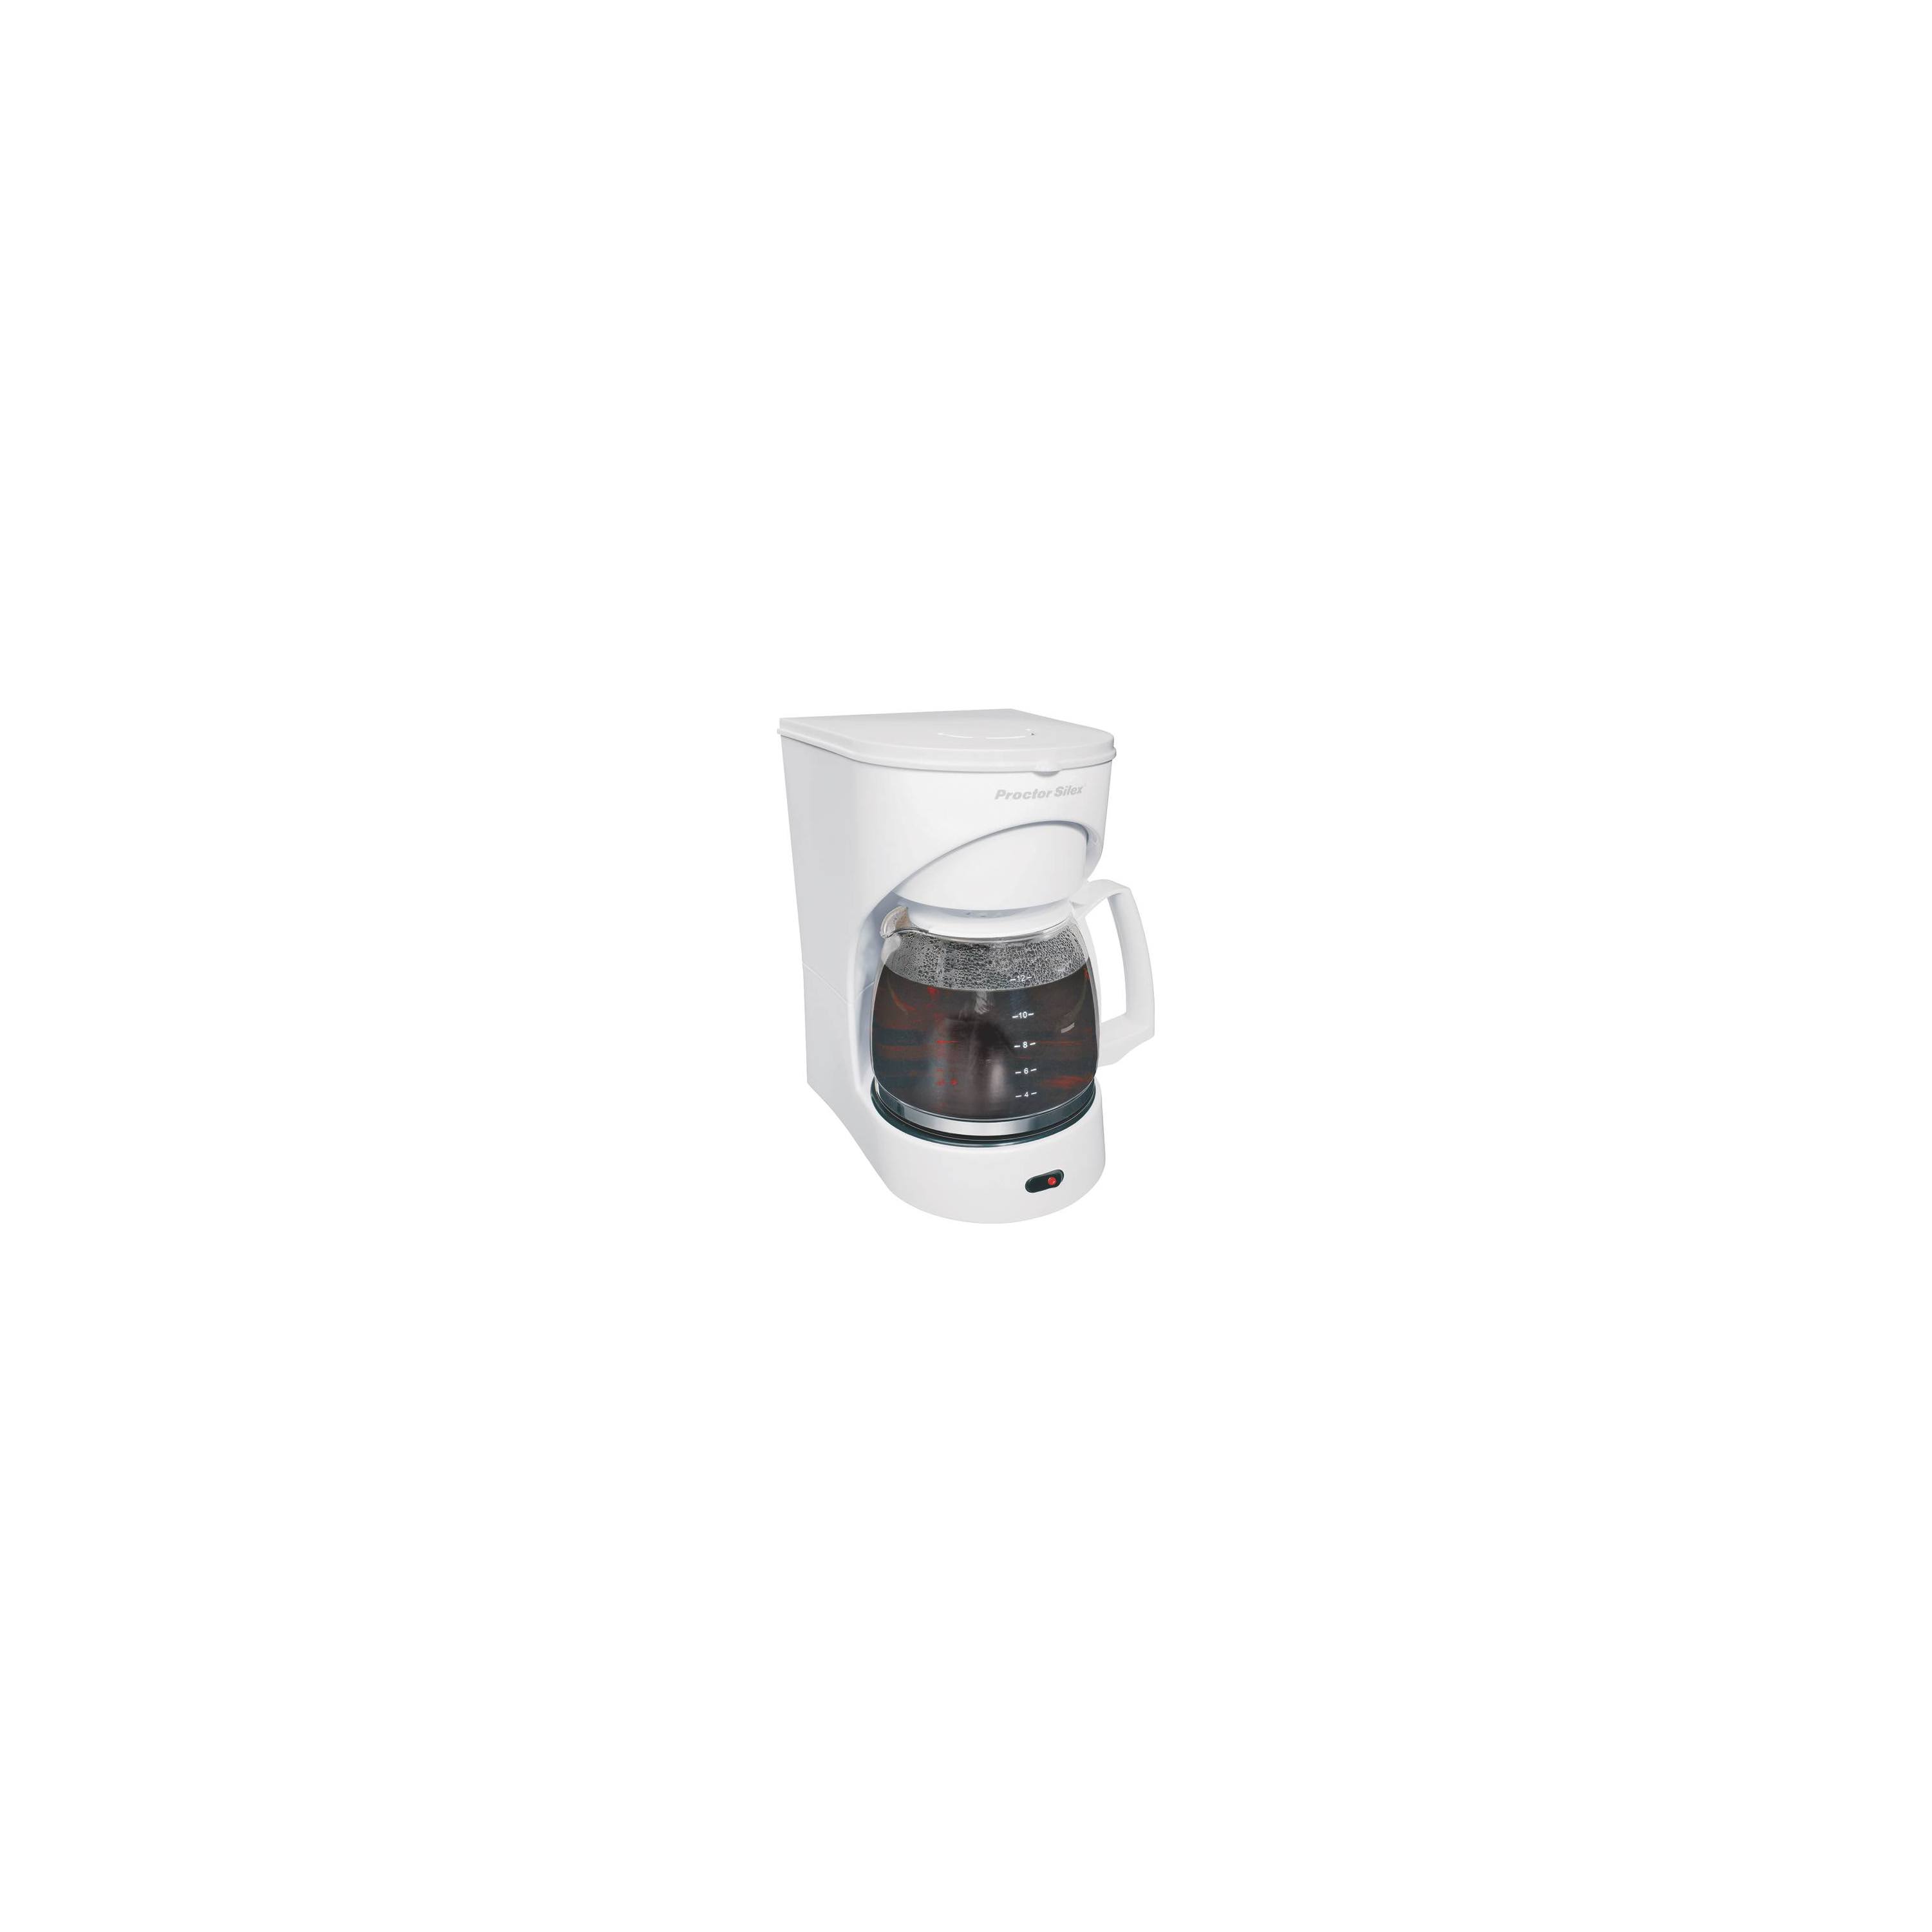 Proctor Silex Auto Pause and Serve Coffee Maker - 12-Cup, White